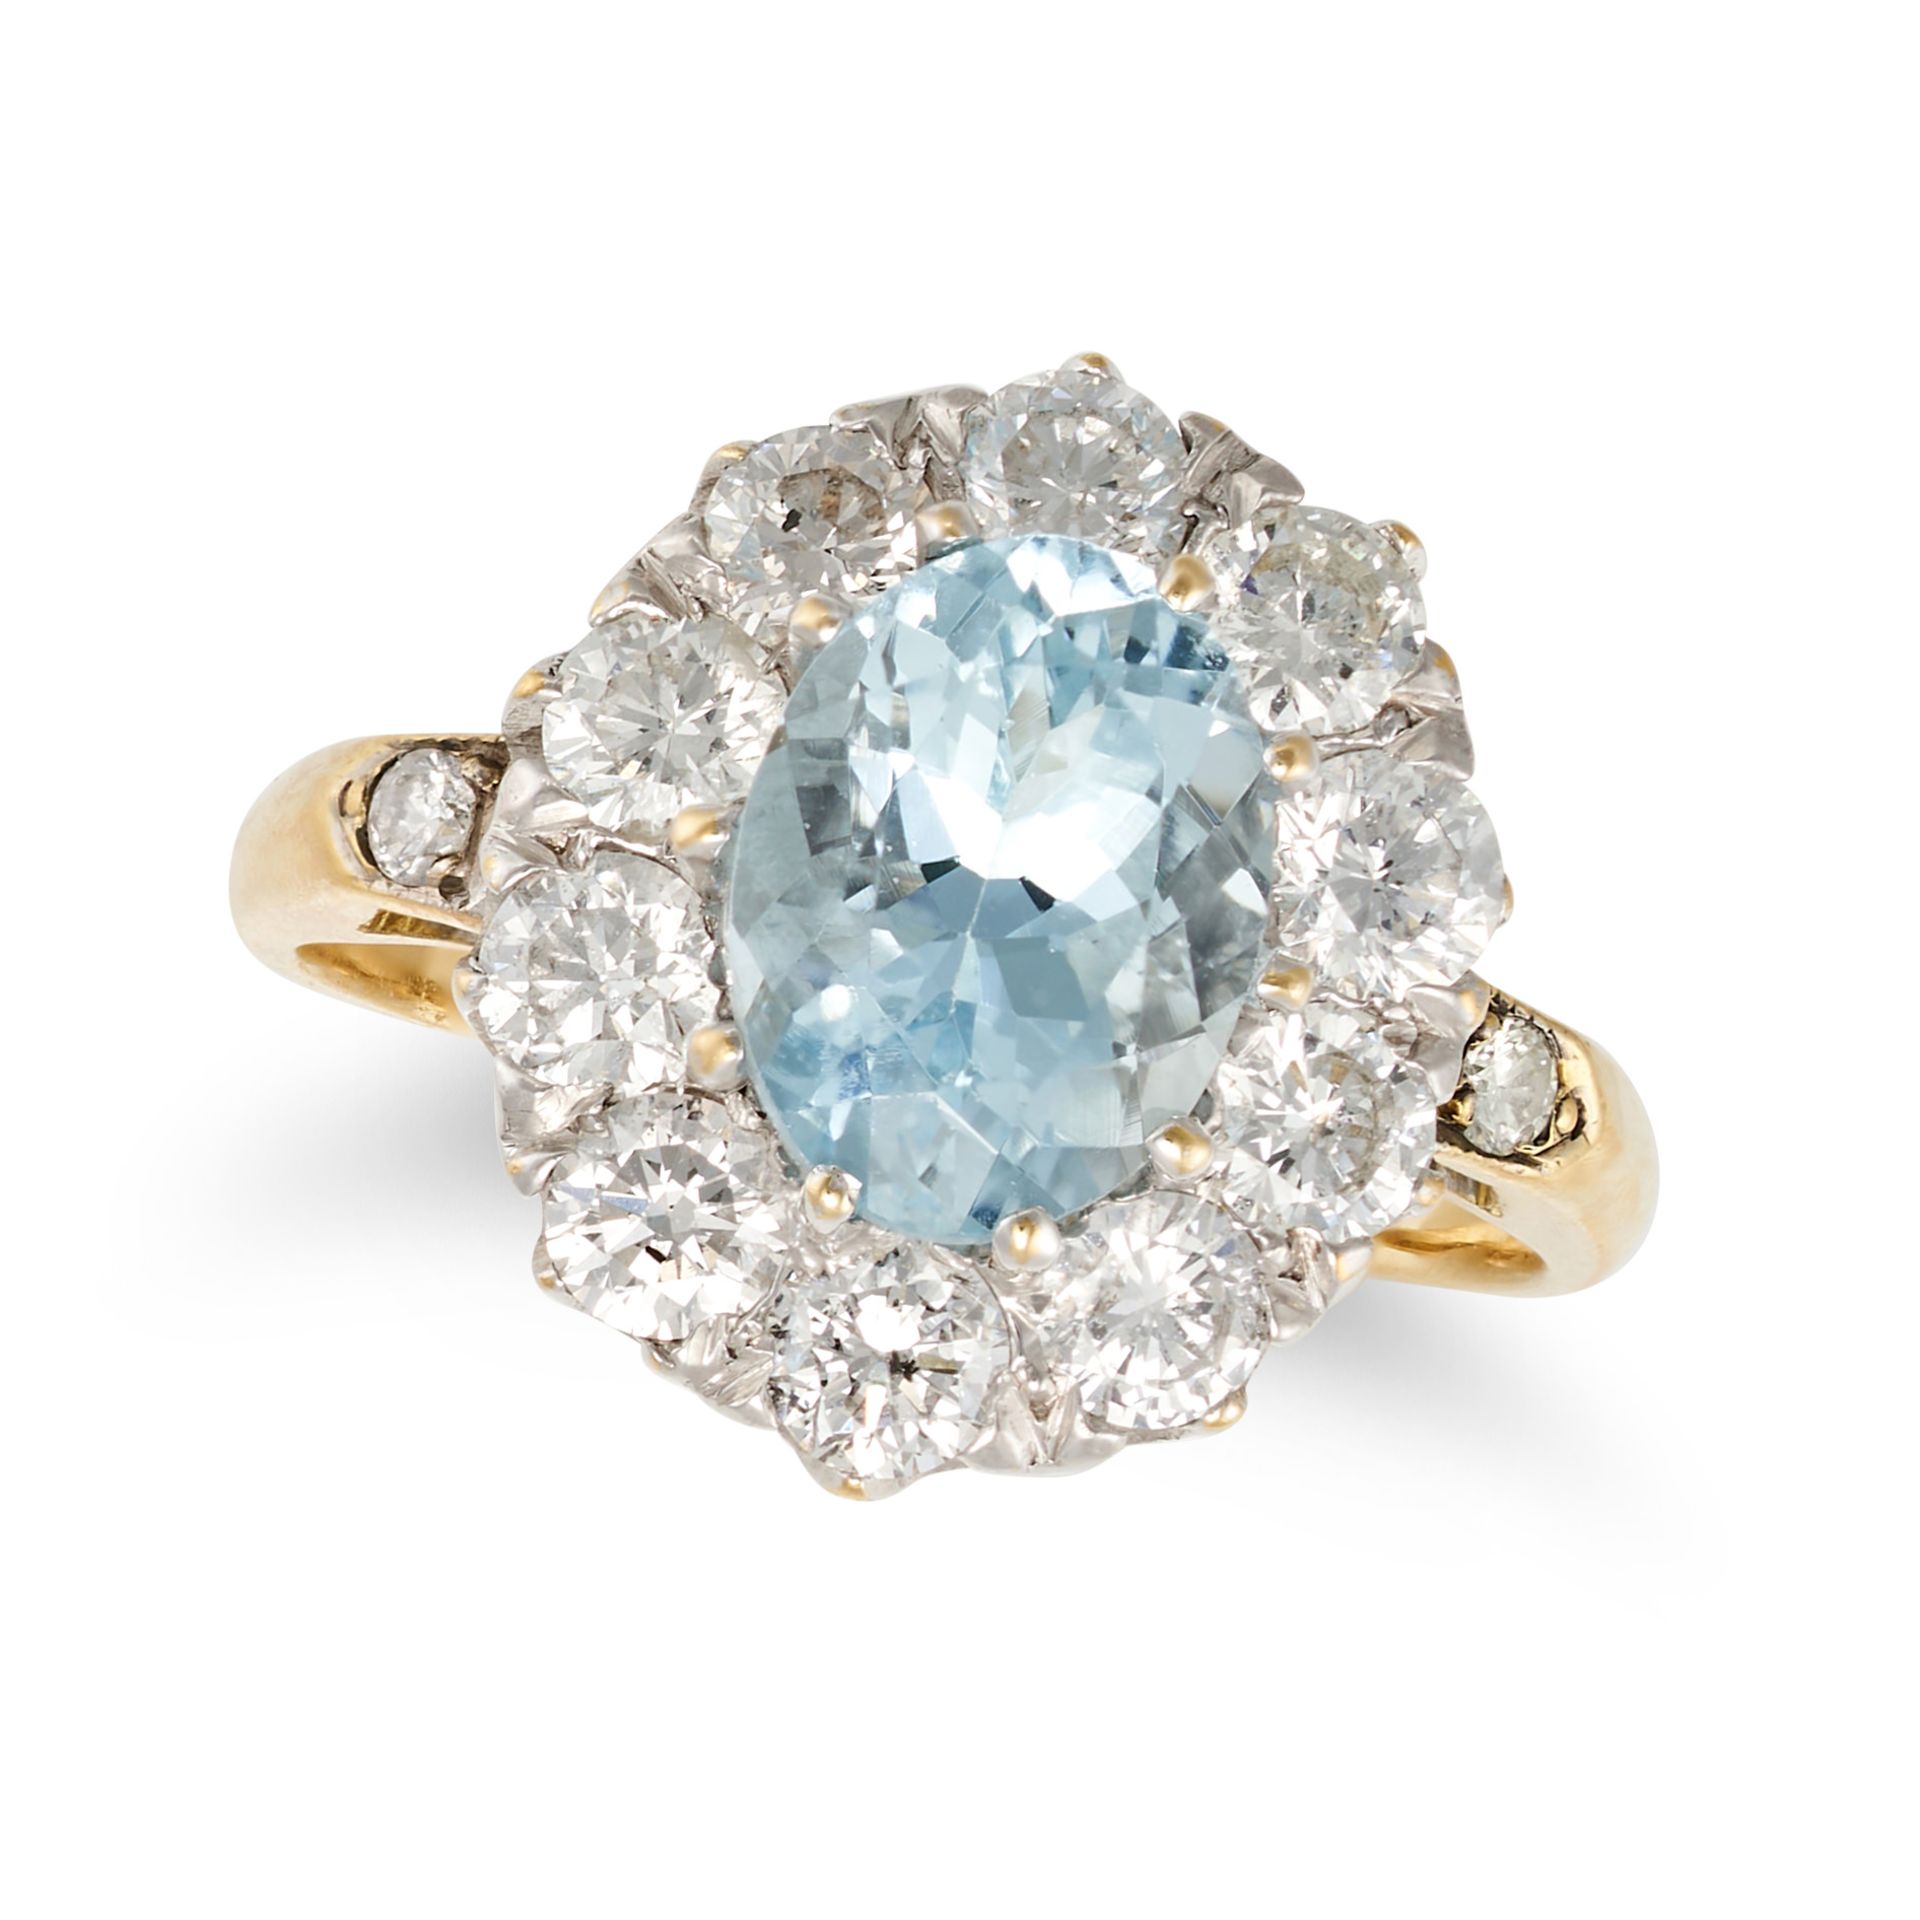 NO RESERVE - AN AQUAMARINE AND DIAMOND CLUSTER RING in yellow gold, set with an oval cut aquamari...